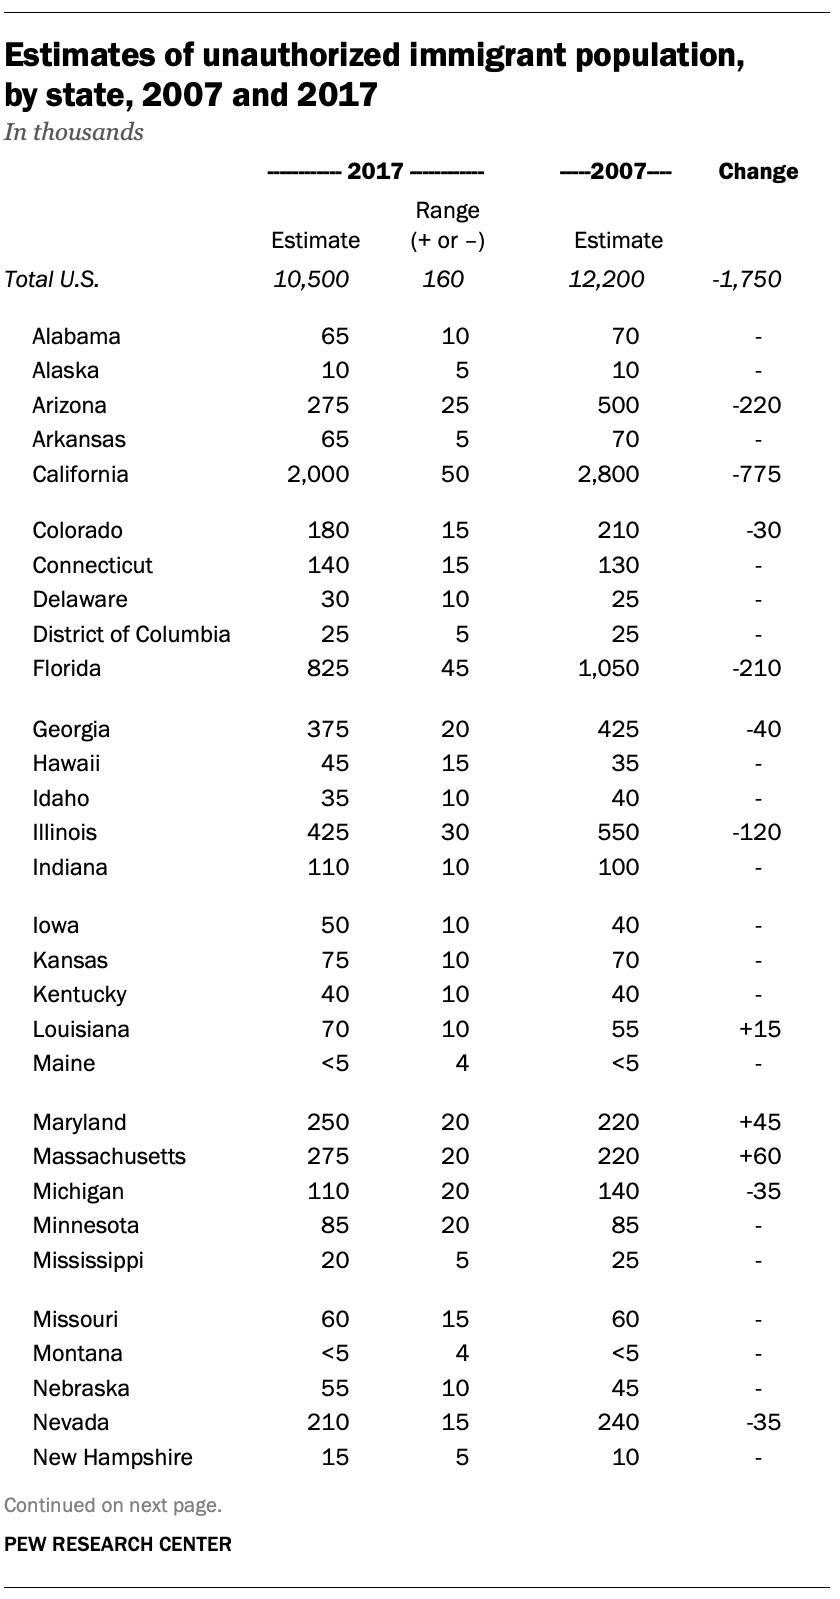 Estimates of unauthorized immigrant population, by state, 2007 and 2017